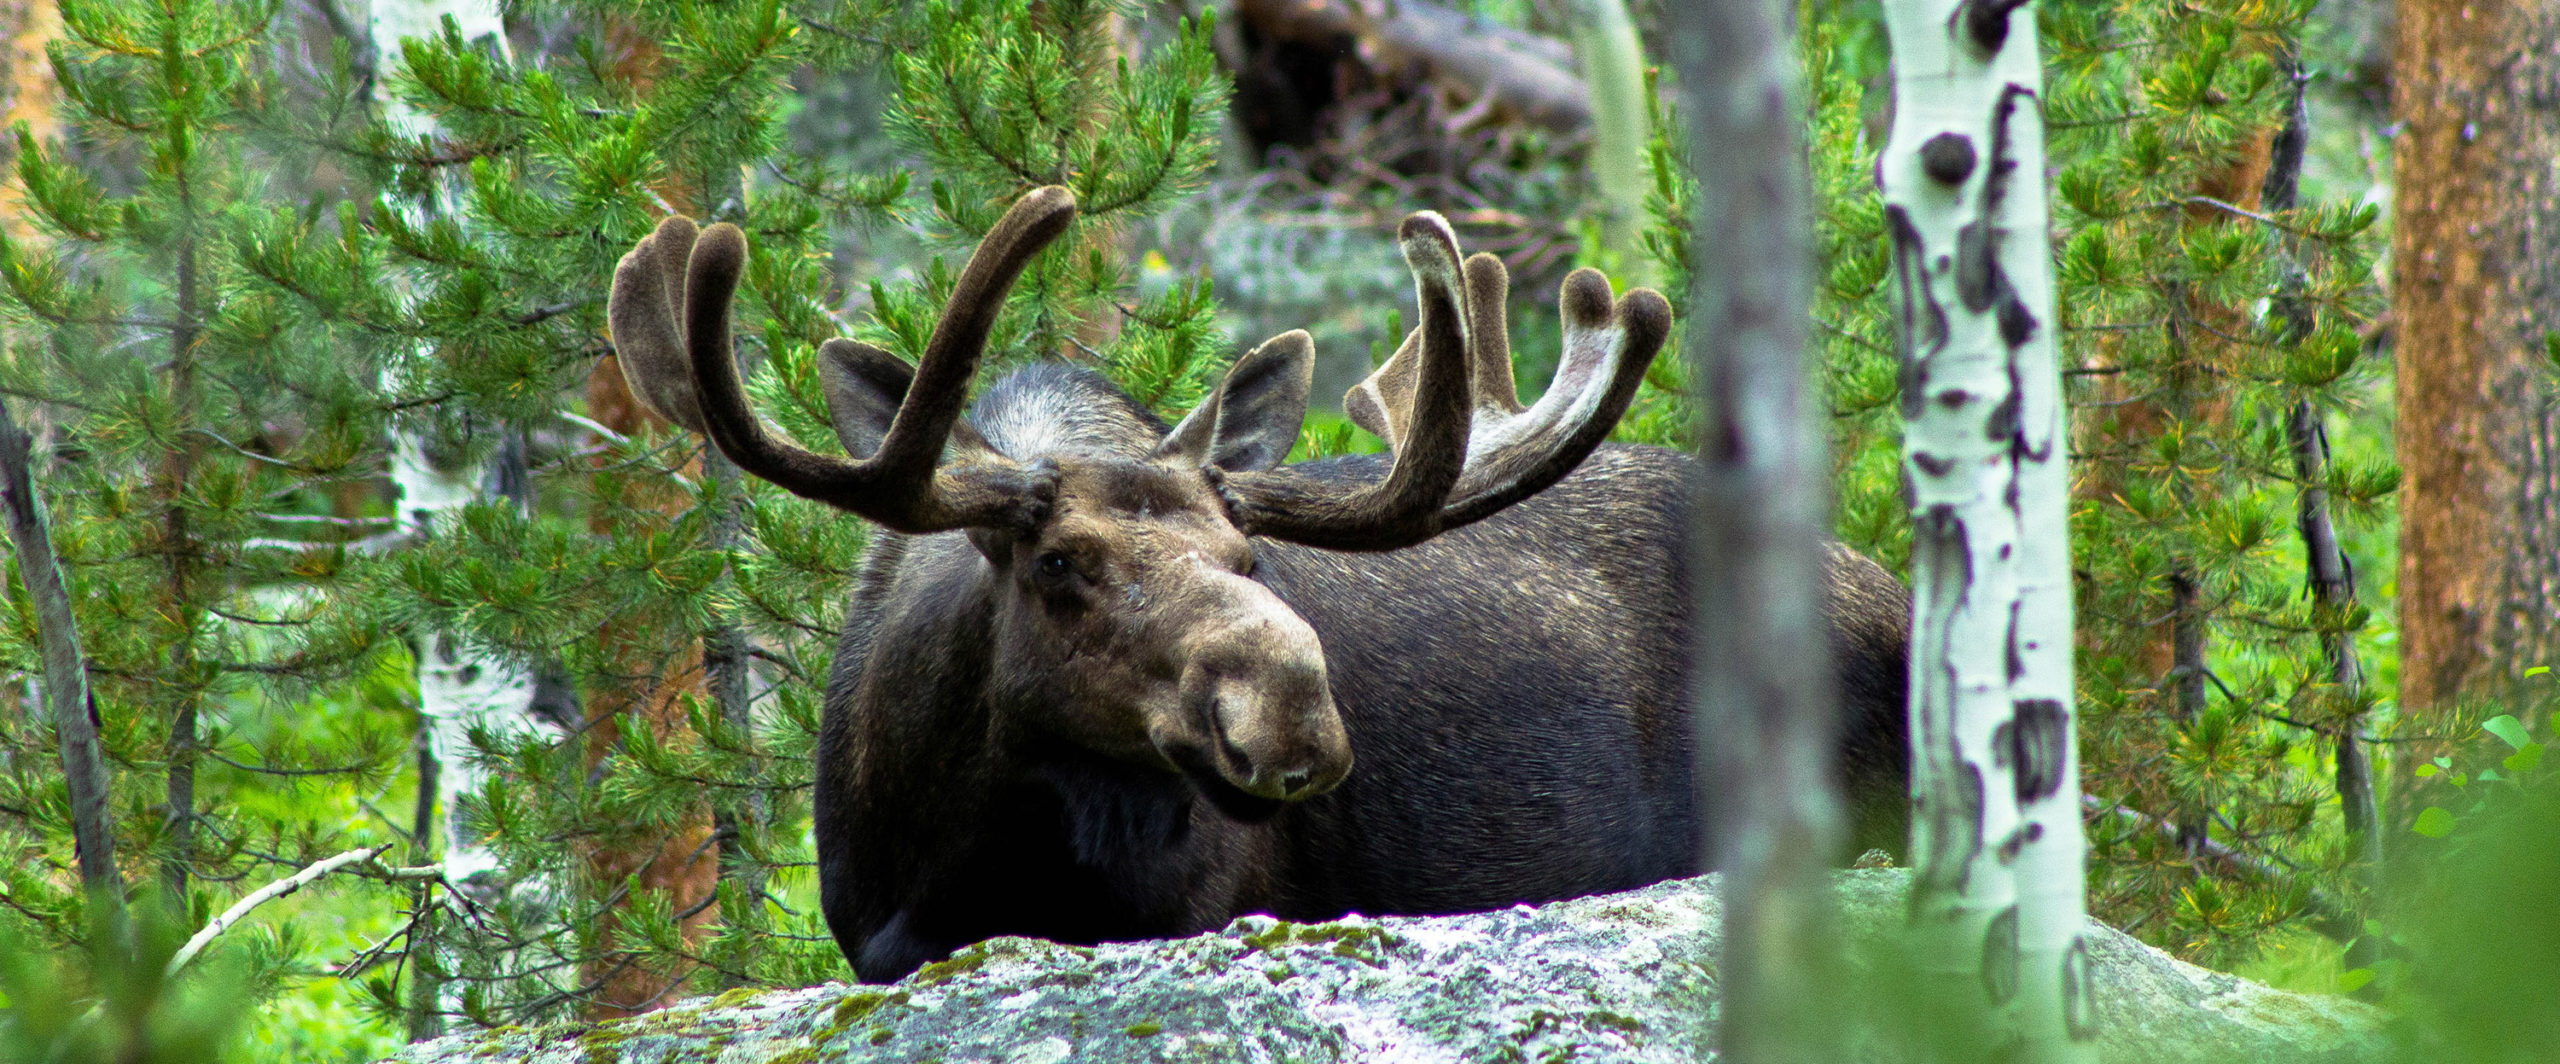 Bull moose in forest